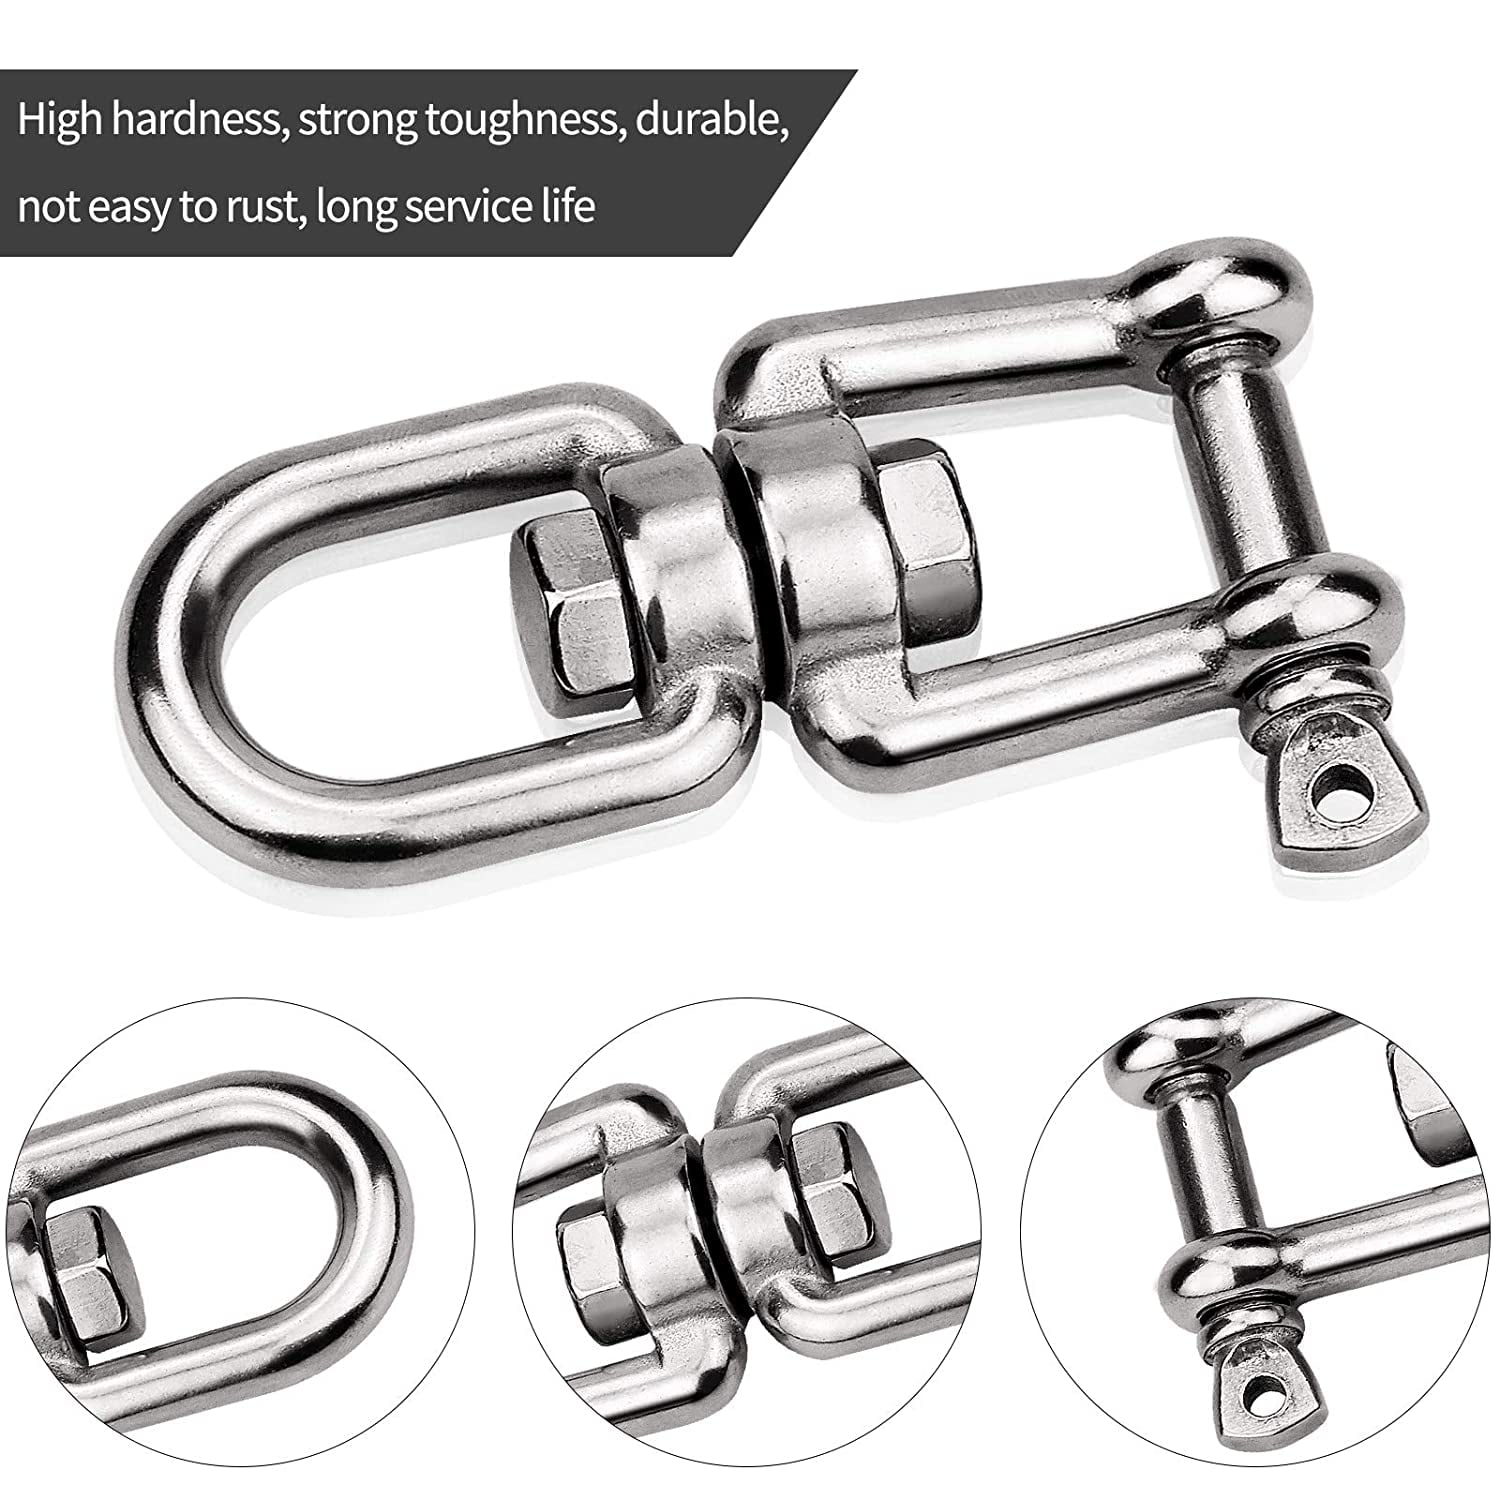 Details about   2X 304 Stainless Steel Marine Boat Anchor Swivel Shackle Double Shackle 